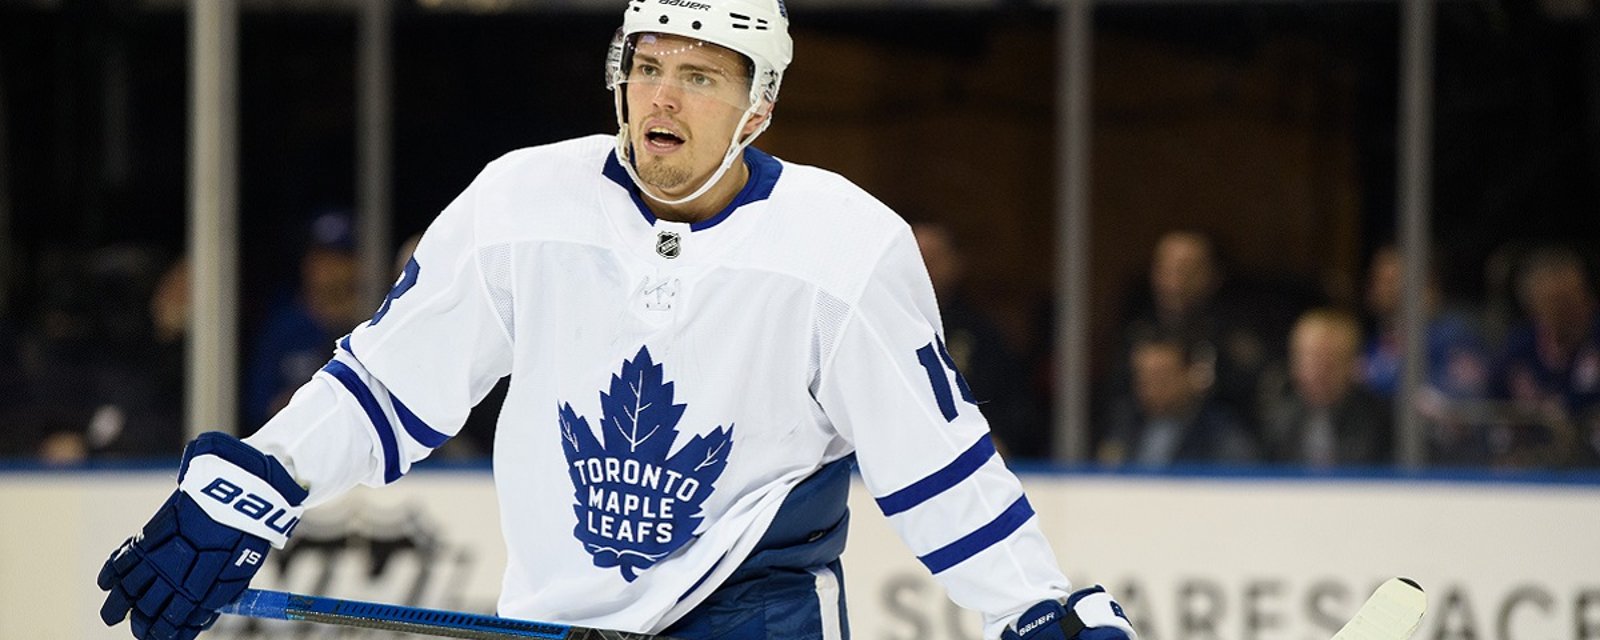 Sheldon Keefe makes a last minute change to the Leafs lineup.